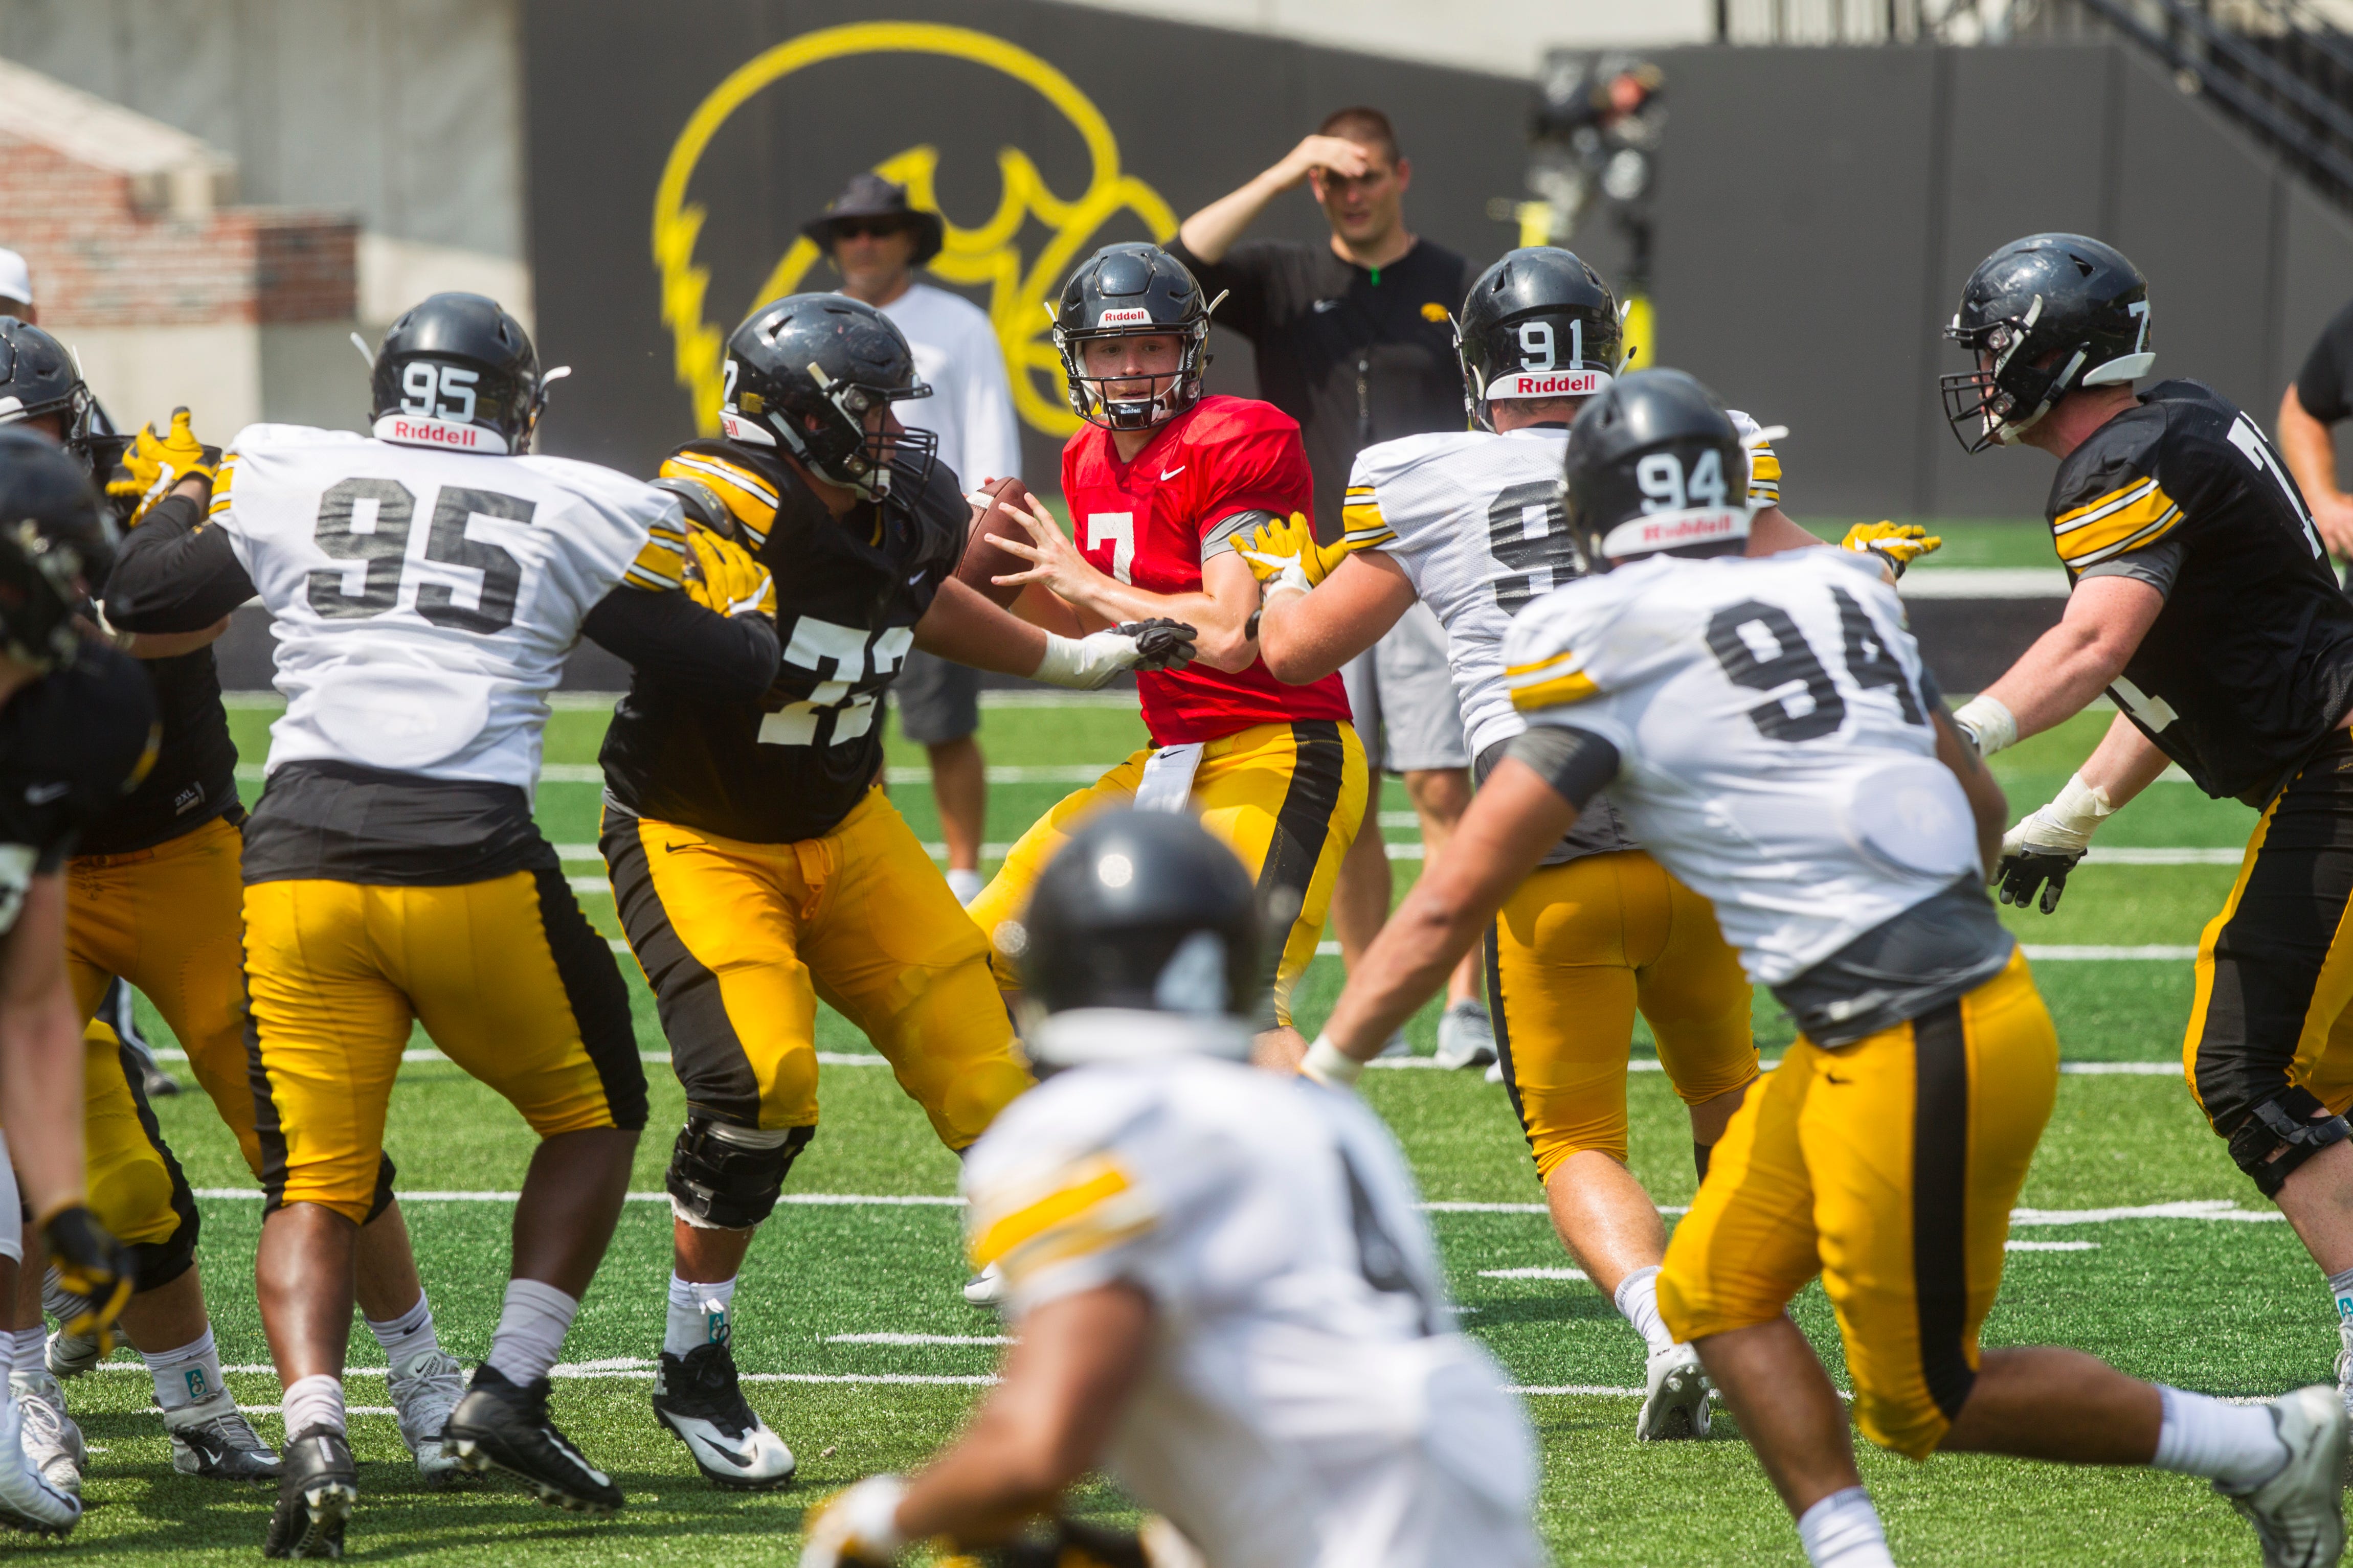 Iowa quarterback Spencer Petras looks for a receiver while defensive linemen Cedrick Lattimore and Brady Reiff apply pressure during a Kids Day practice on Saturday, Aug. 11, 2018, at Kinnick Stadium in Iowa City.